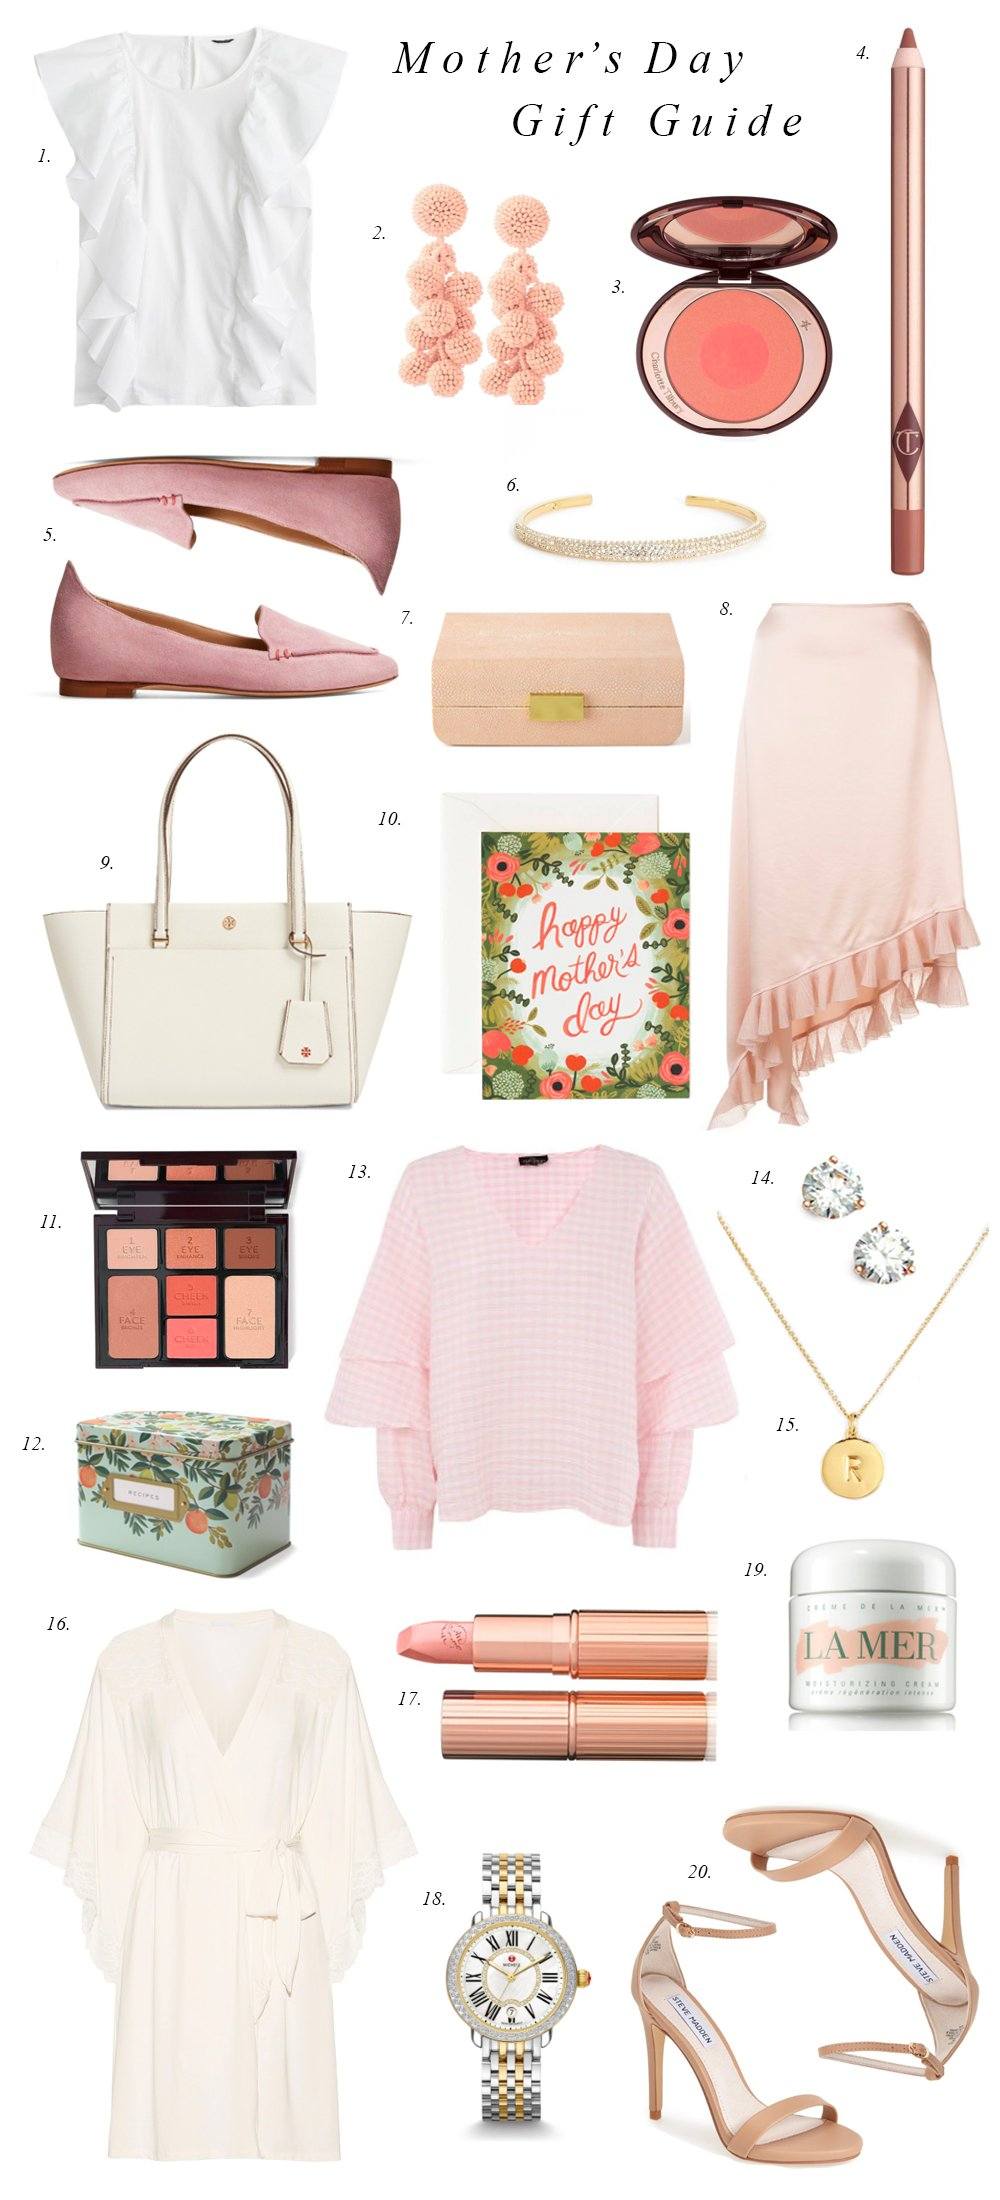 Mother's Day Gift Guide...